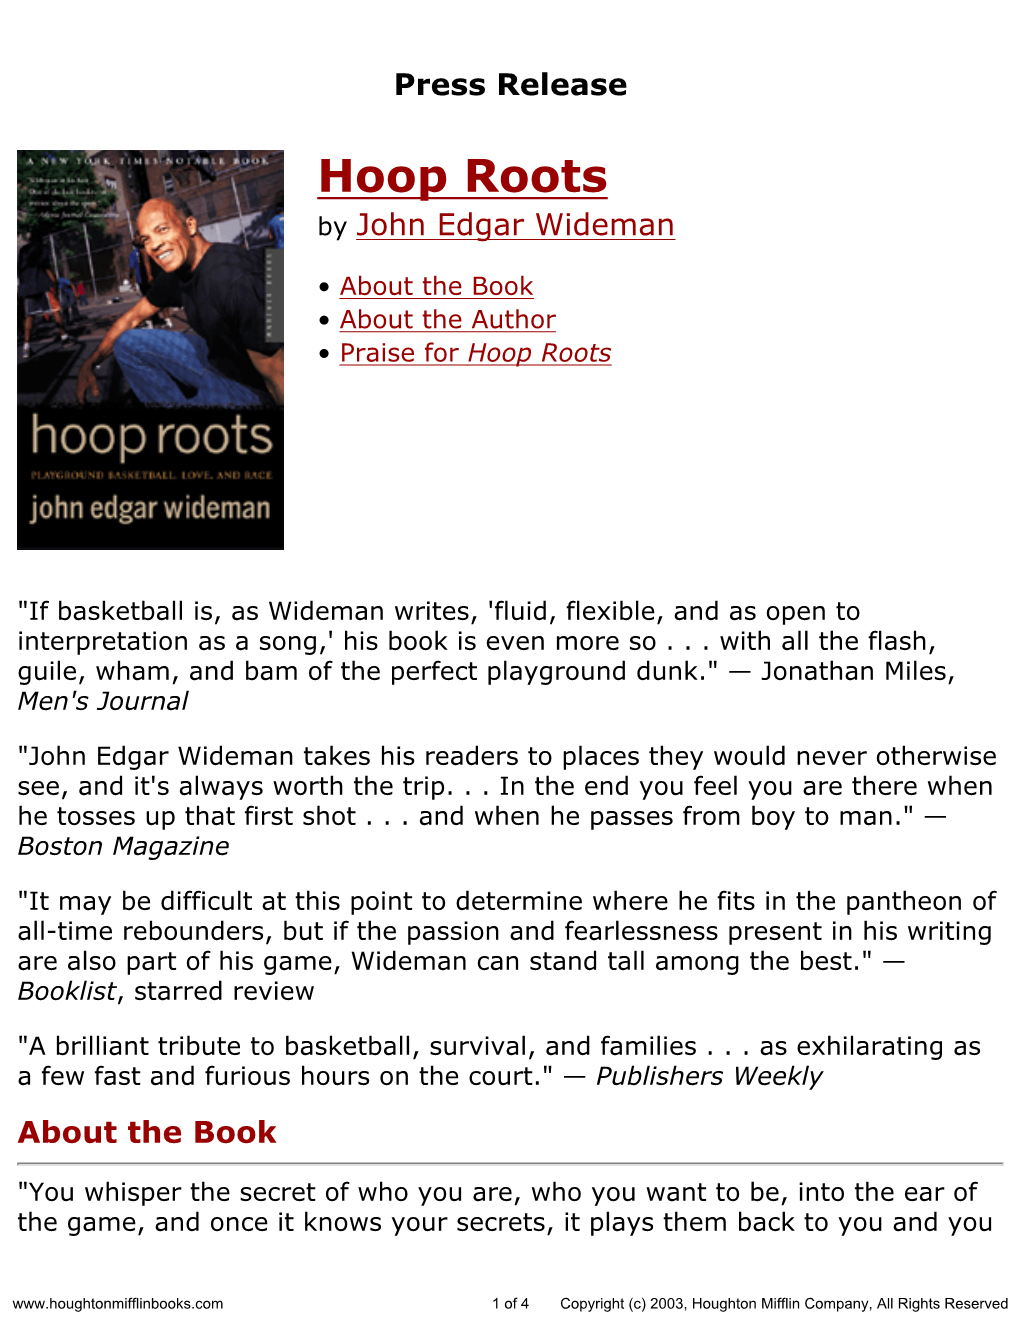 Press Release for Hoop Roots Published by Houghton Mifflin